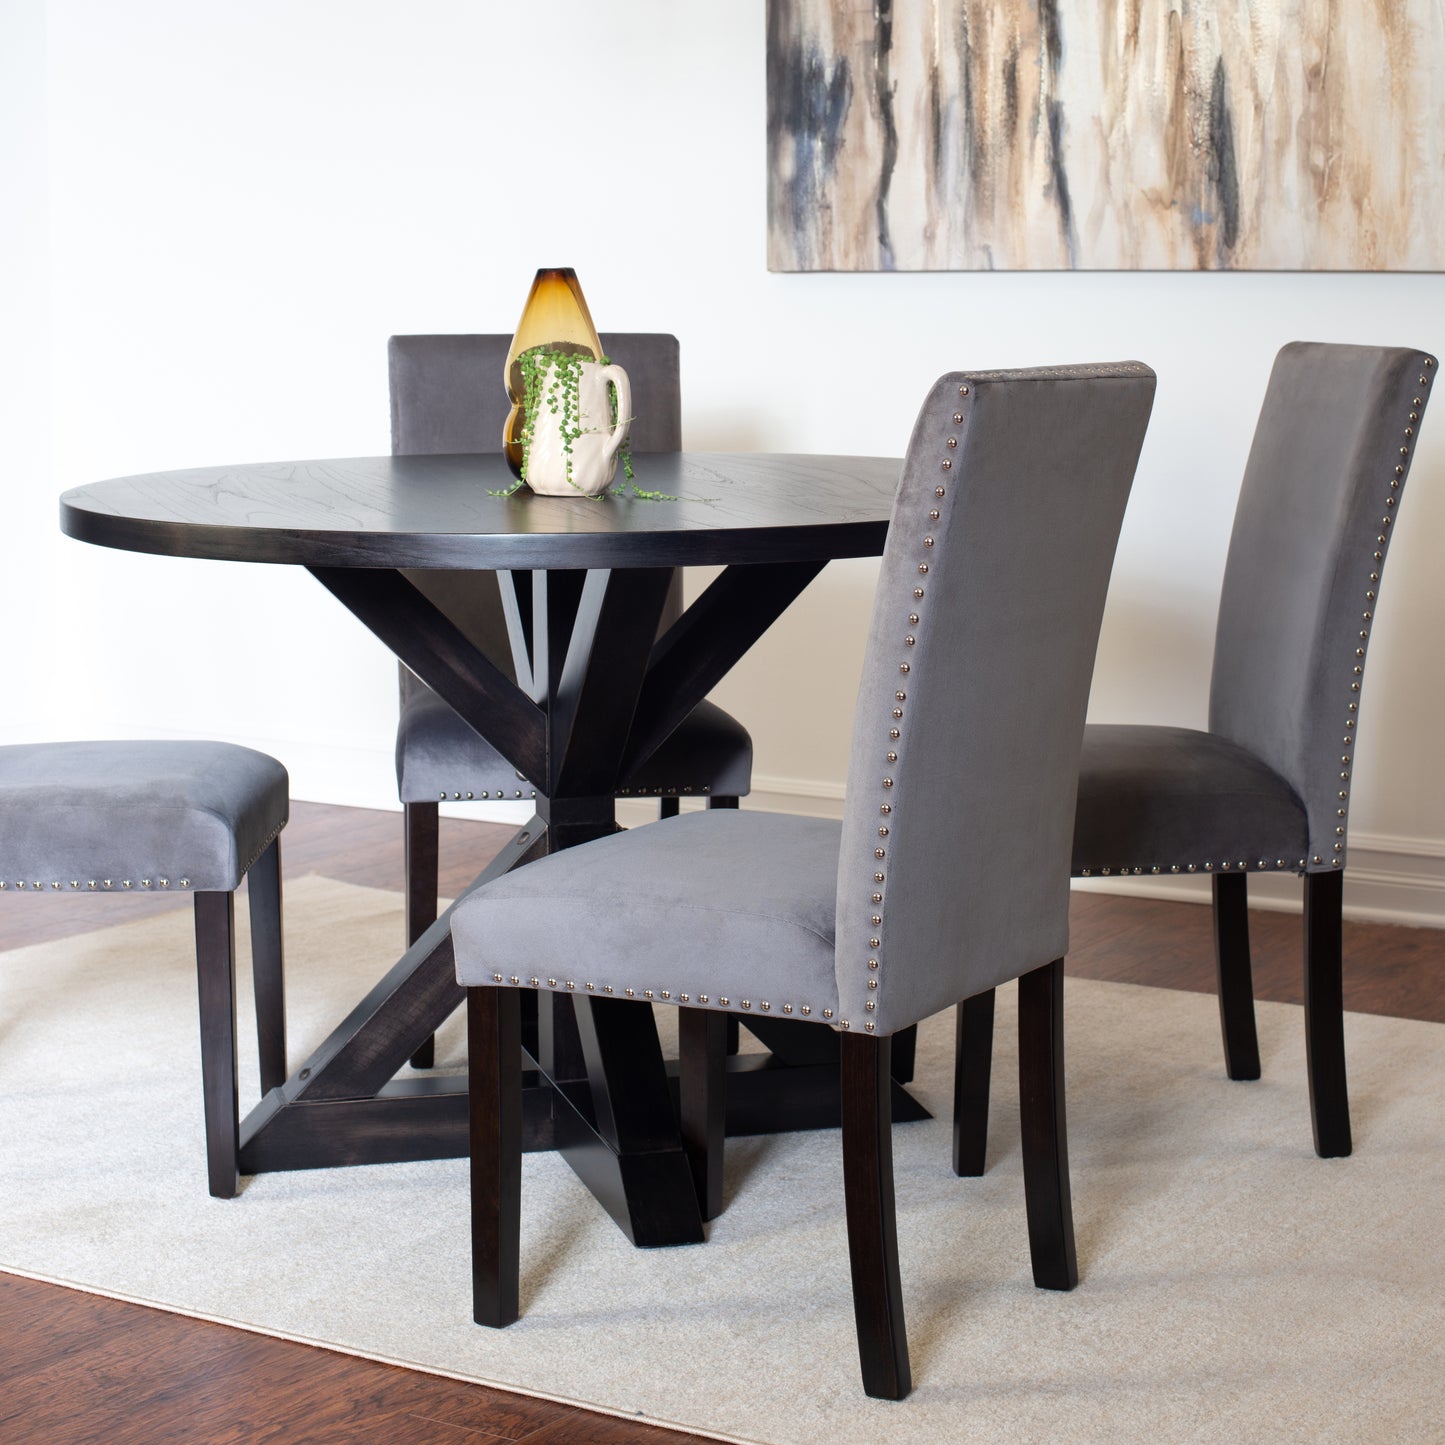 Enbridge 5-piece Dining Set, Cross-Buck Dining Table with 4 Stylish Chairs